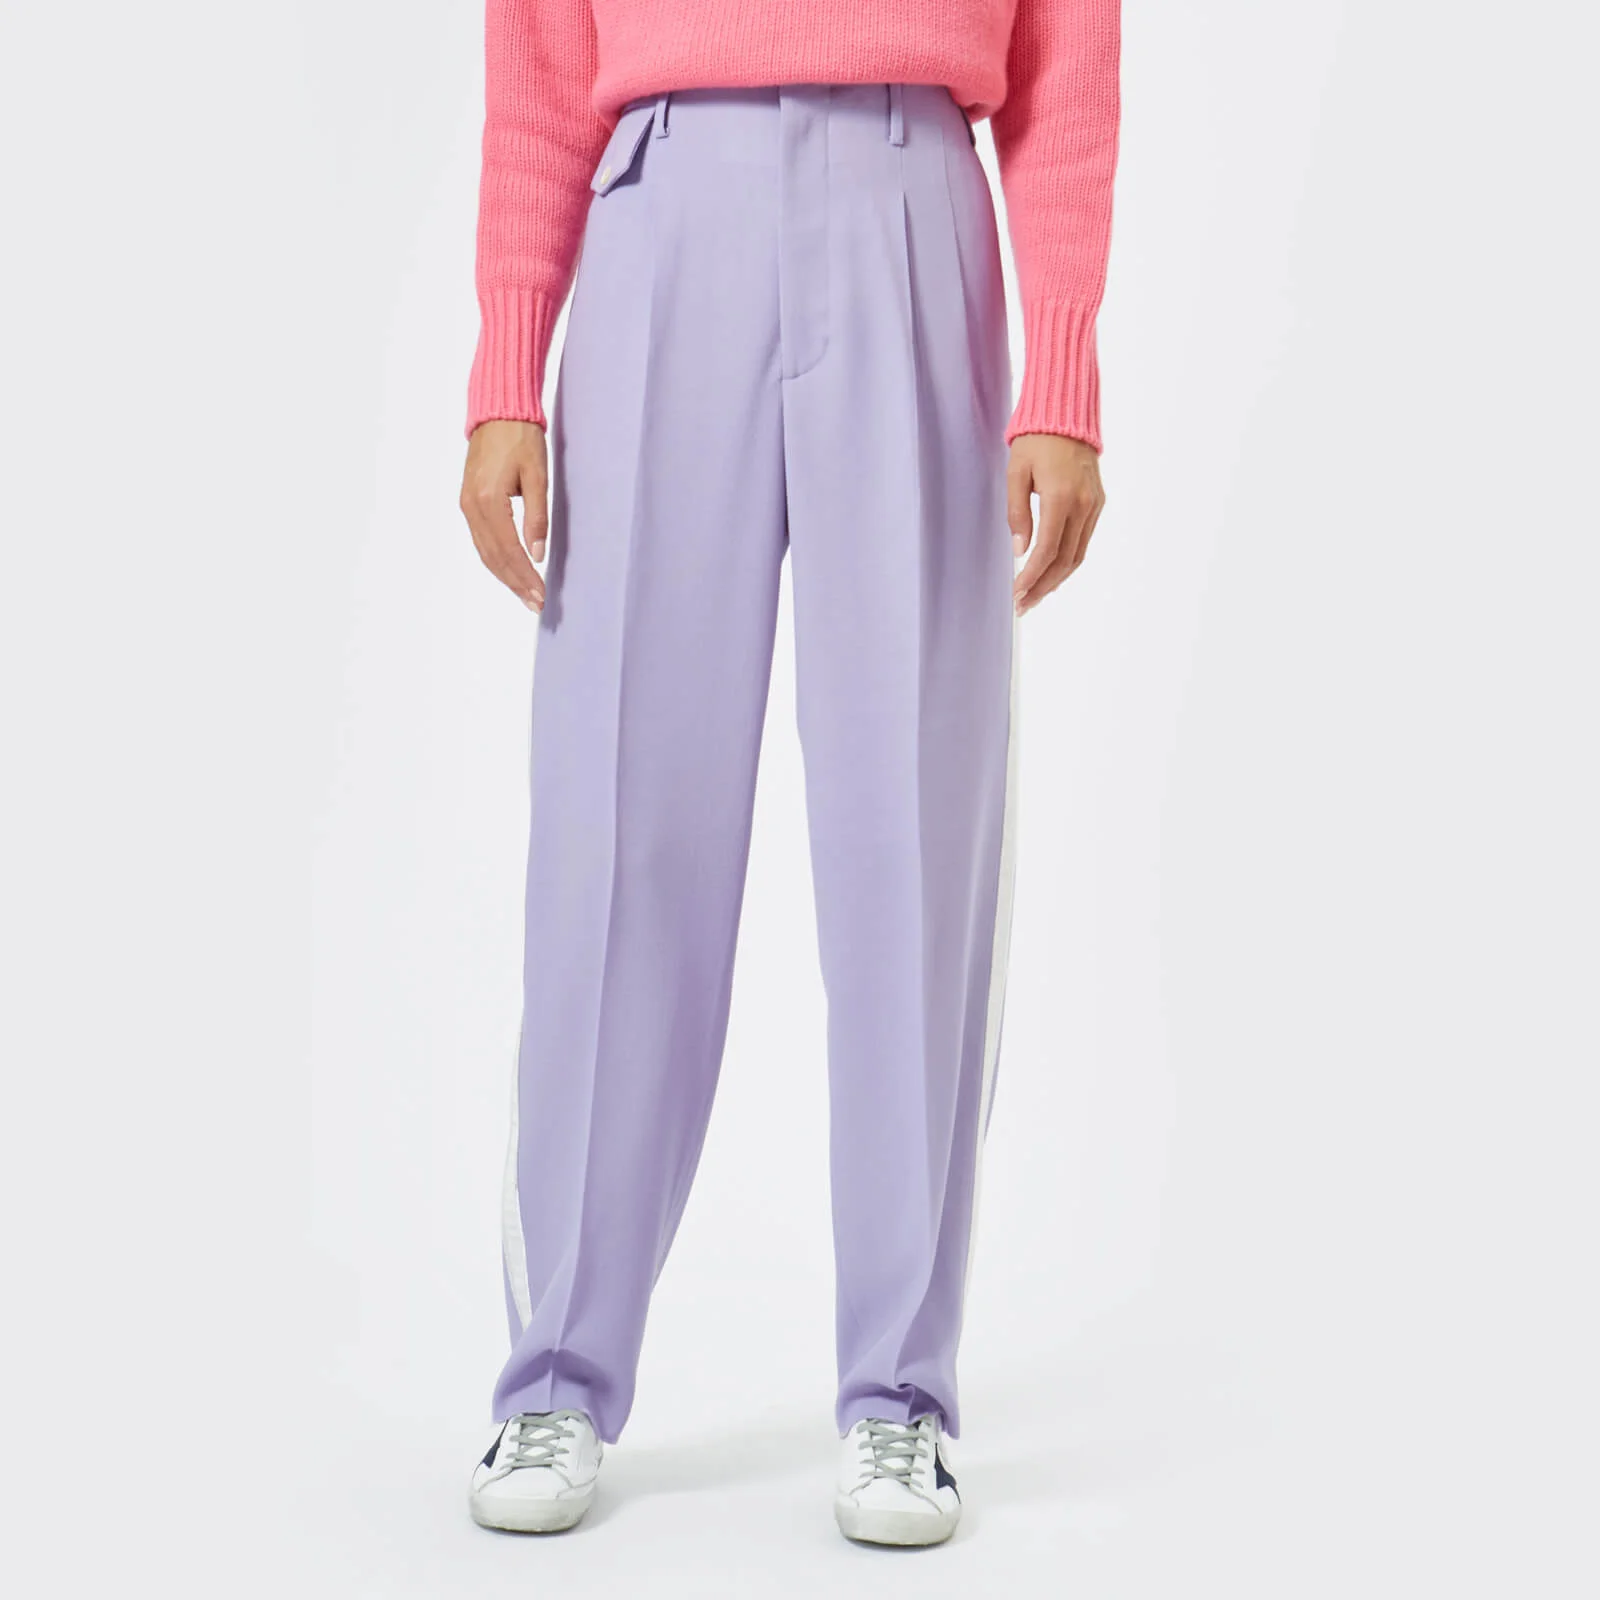 Golden Goose Women's Sally Trousers - Lilac Breeze Image 1